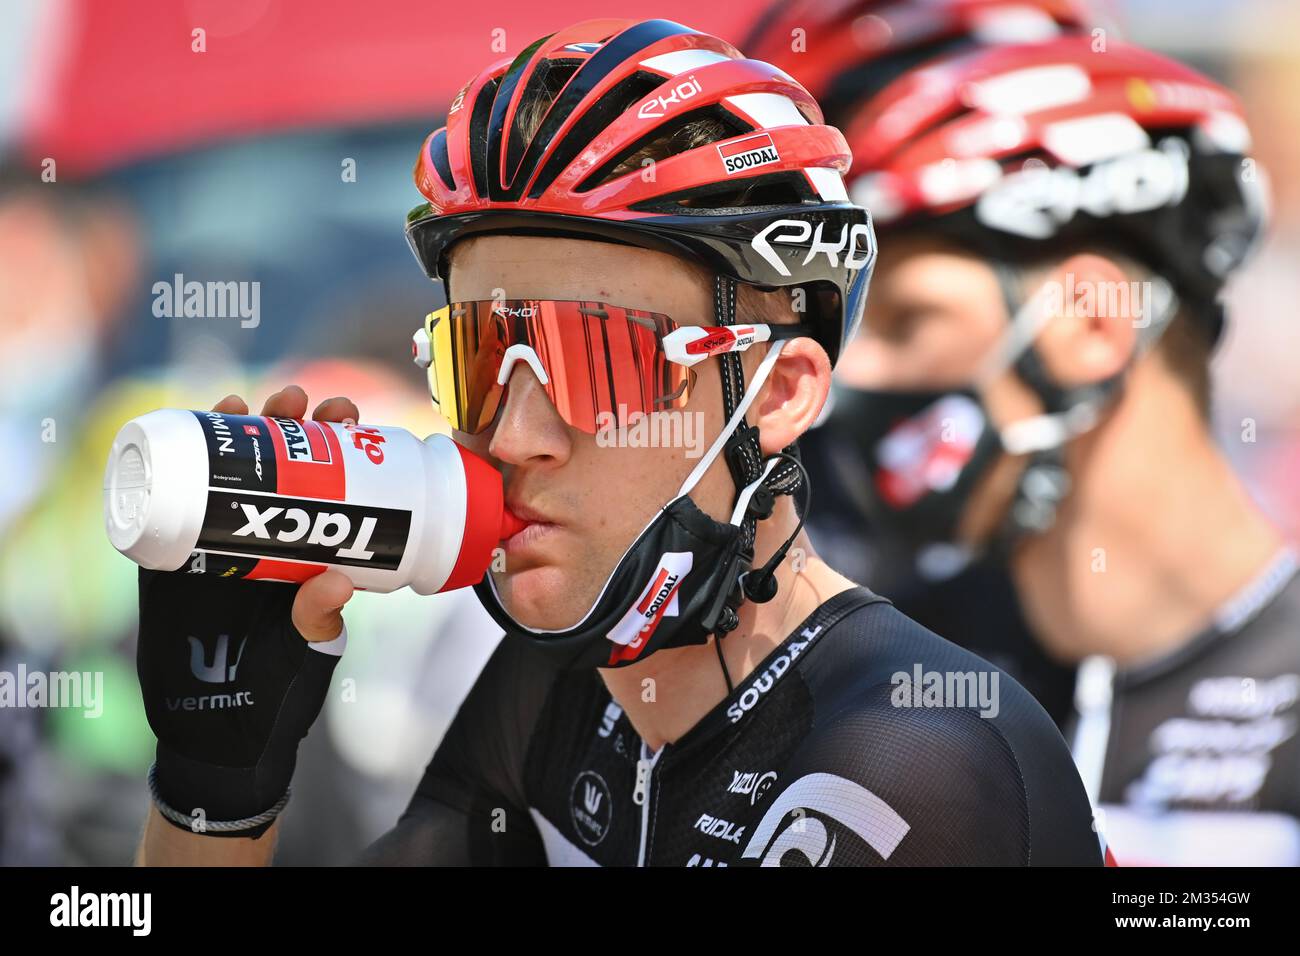 Belgian Tim Wellens of Lotto Soudal at the start of the fifth stage of the 73rd edition of the Criterium du Dauphine cycling race, 174,5km from Saint Chamond to Saint-Vallier, France, Thursday 03 June 2021. BELGA PHOTO DAVID STOCKMAN Stock Photo